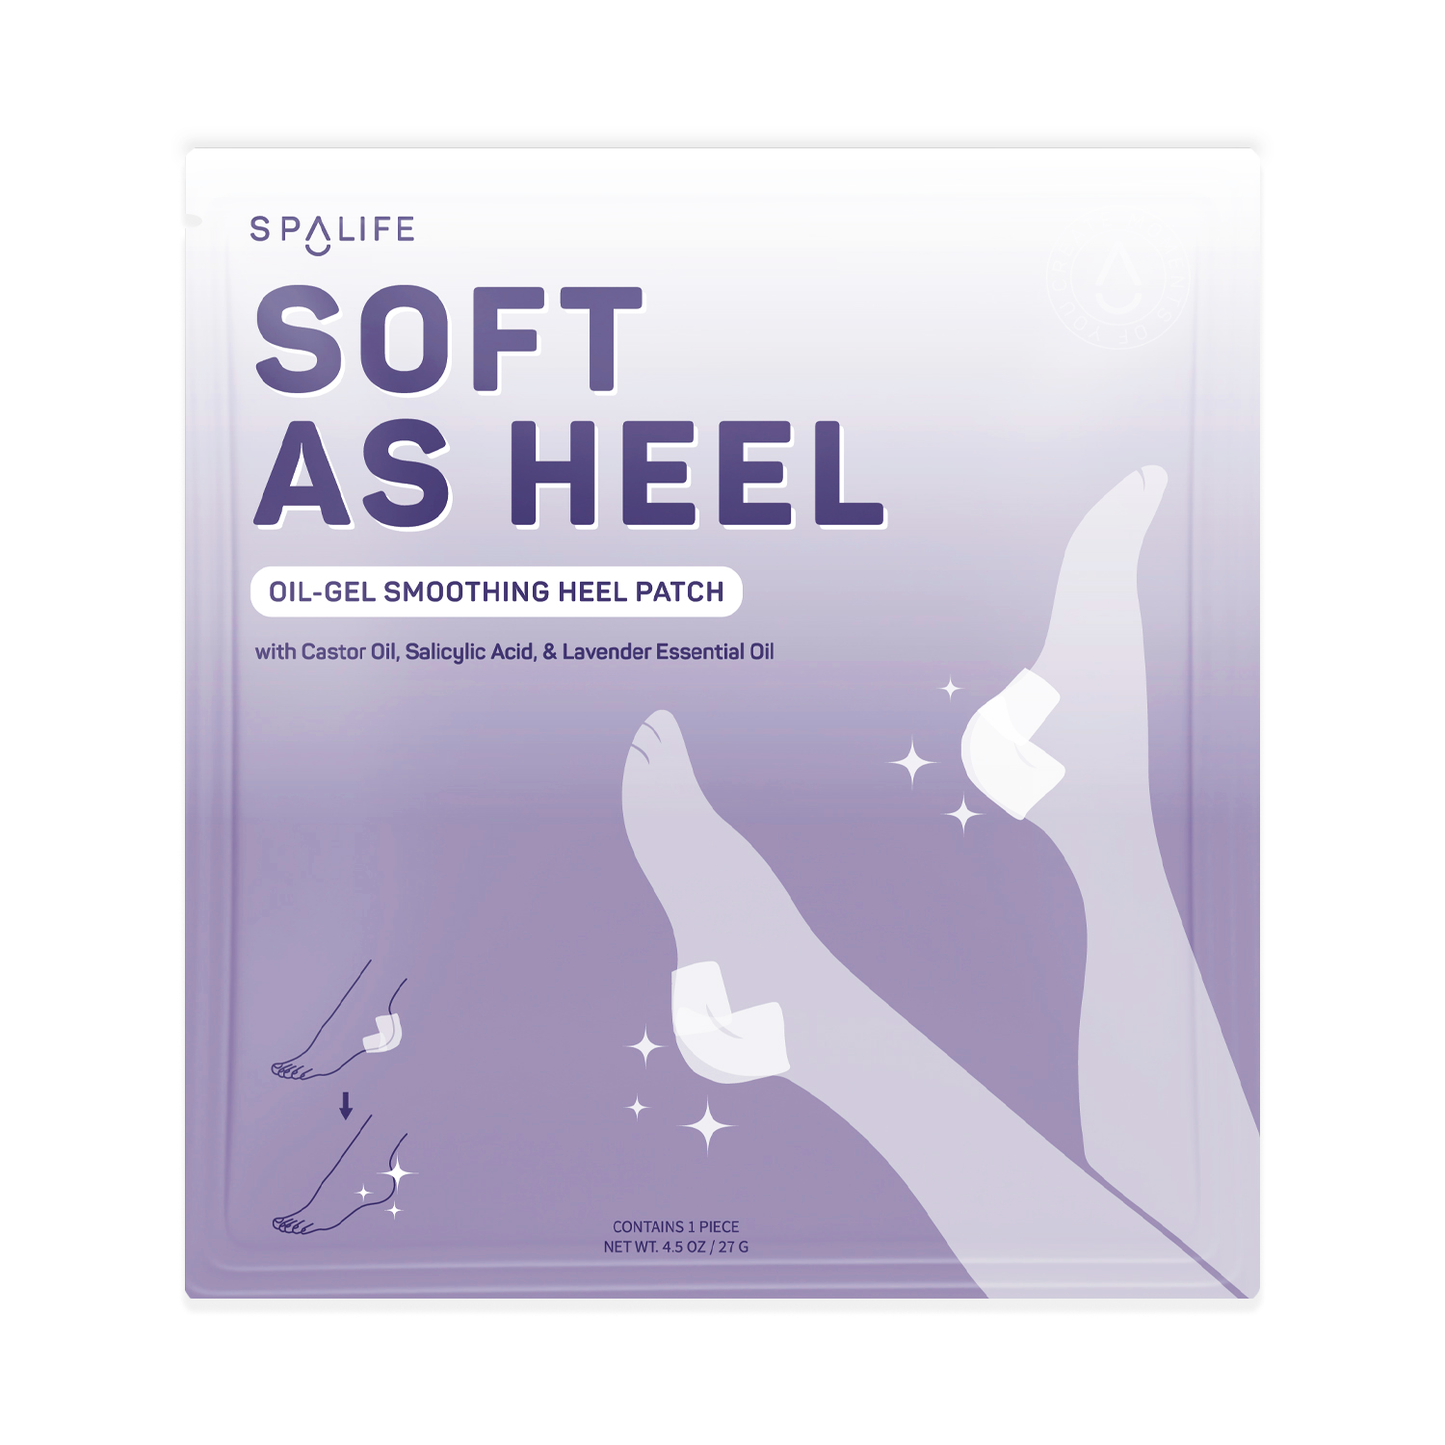 Soft As Heel Oil Gel Smoothing Heel Patch with Castrol Oil